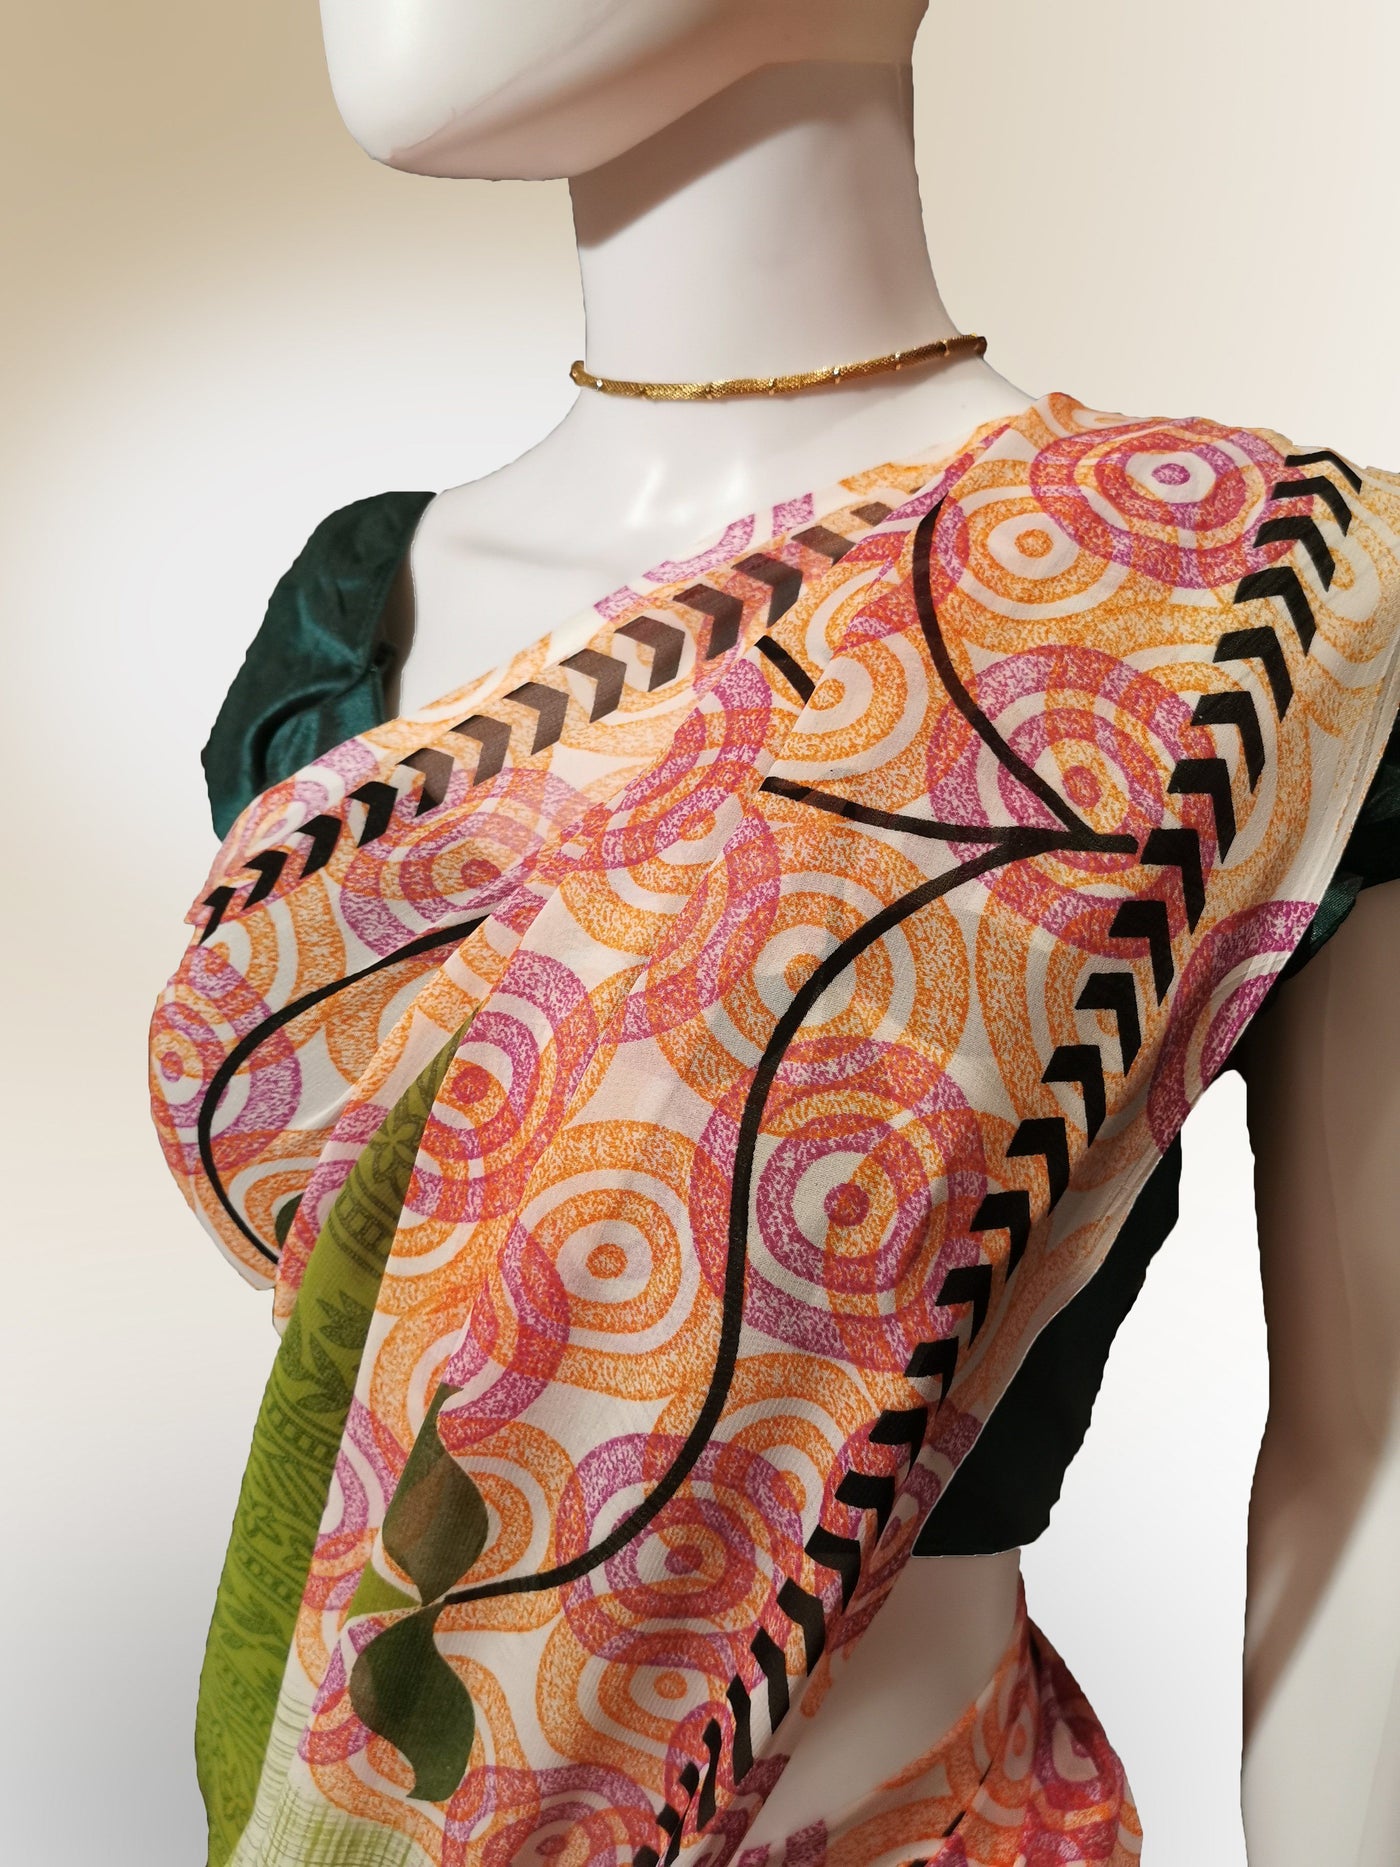 Saree in Green and Pink with Multi Patterned Print Indian Clothing in Denver, CO, Aurora, CO, Boulder, CO, Fort Collins, CO, Colorado Springs, CO, Parker, CO, Highlands Ranch, CO, Cherry Creek, CO, Centennial, CO, and Longmont, CO. NATIONWIDE SHIPPING USA- India Fashion X